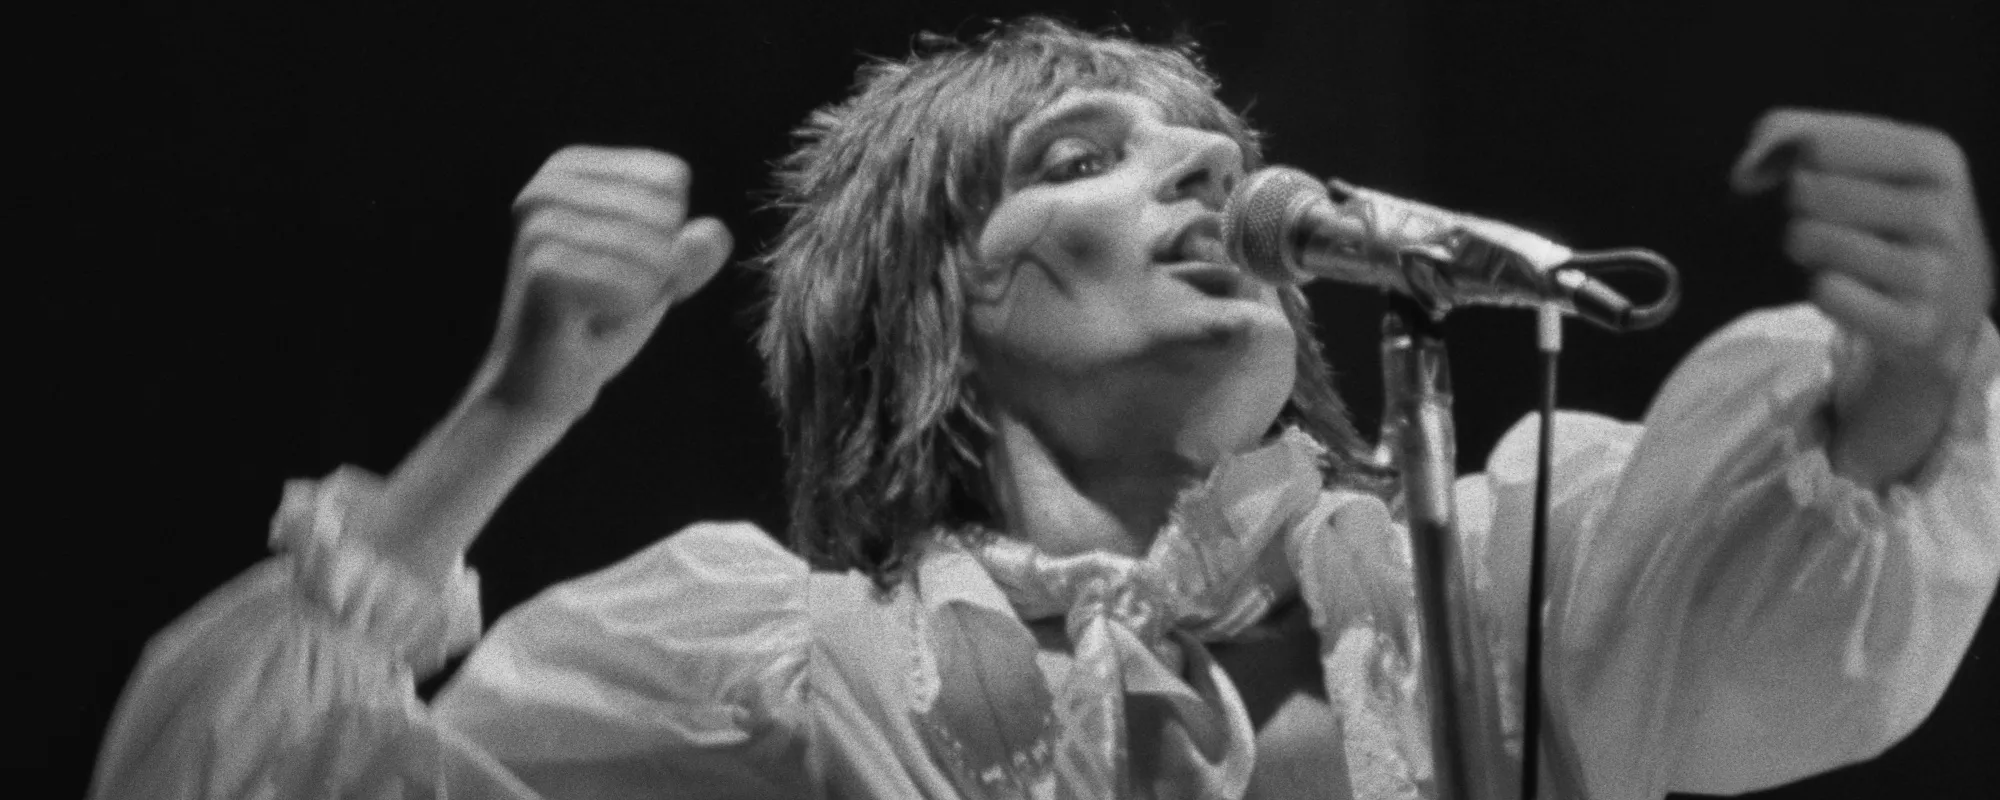 Behind the Album: ‘Every Picture Tells a Story’ by Rod Stewart